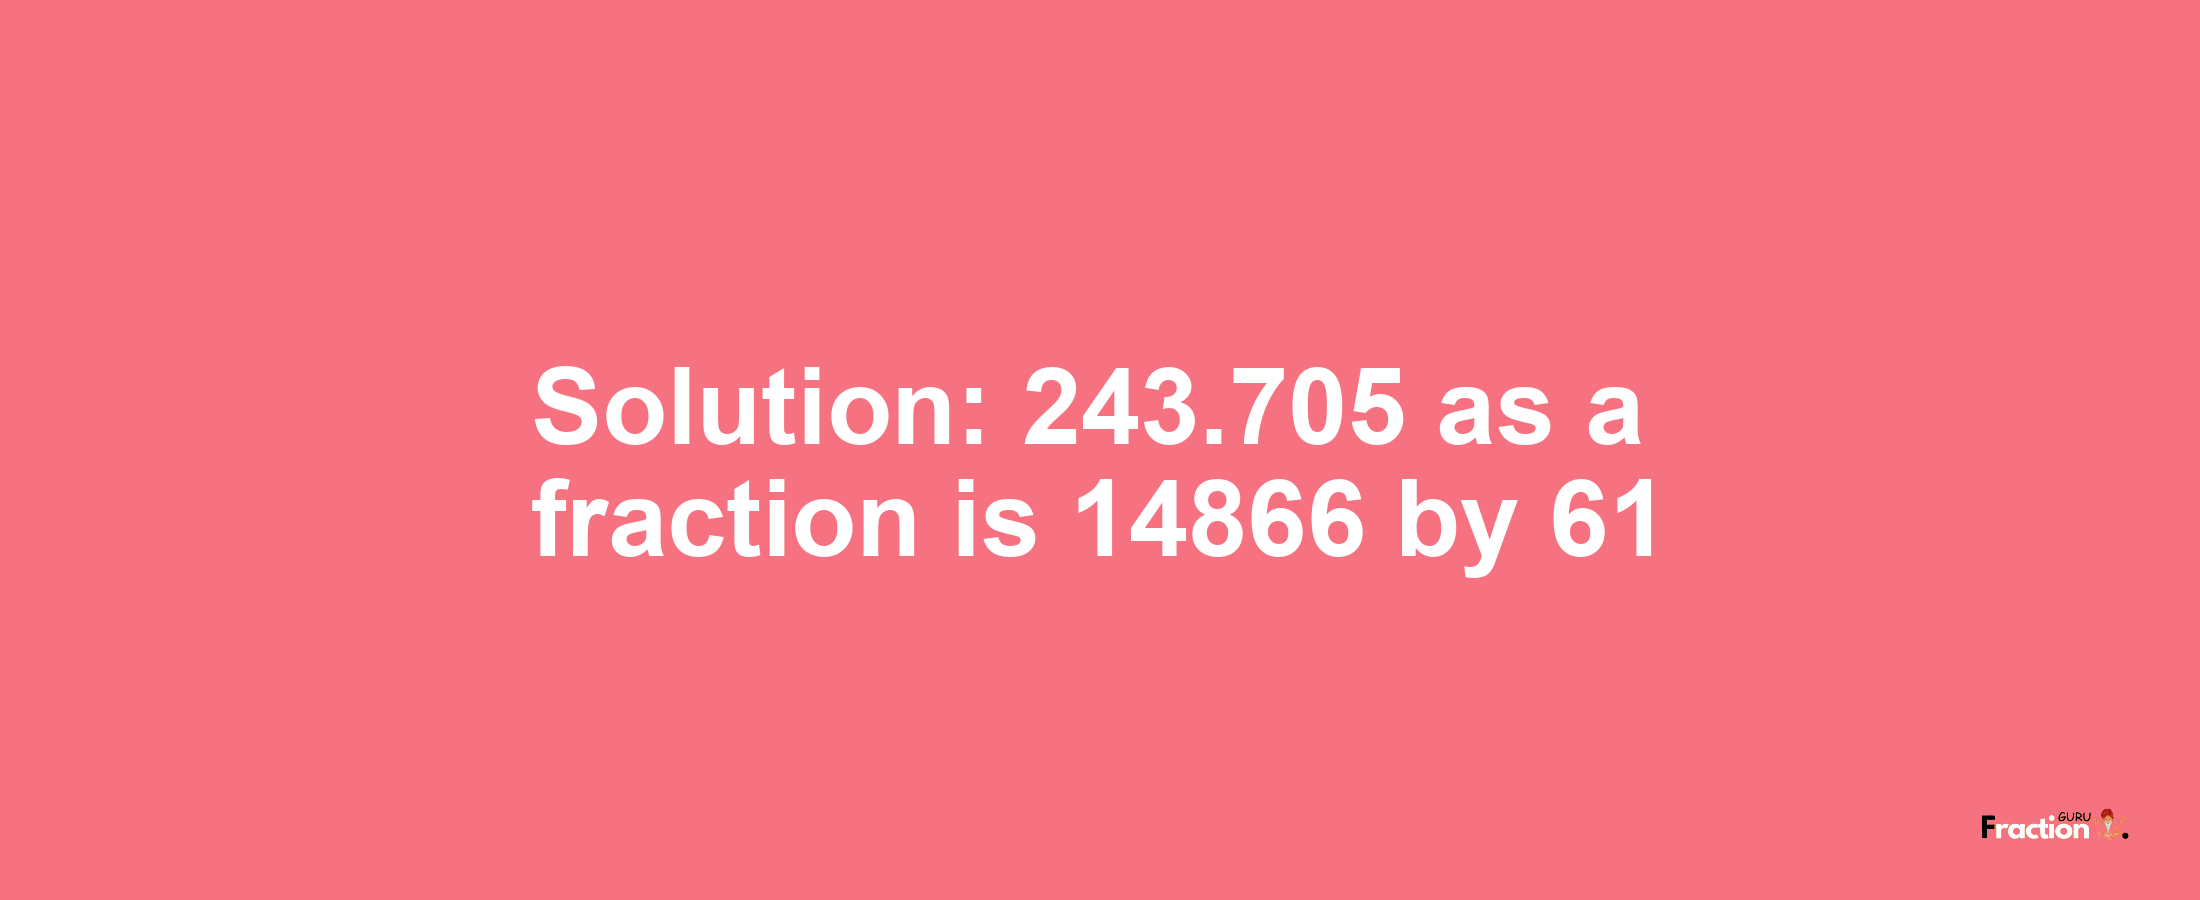 Solution:243.705 as a fraction is 14866/61